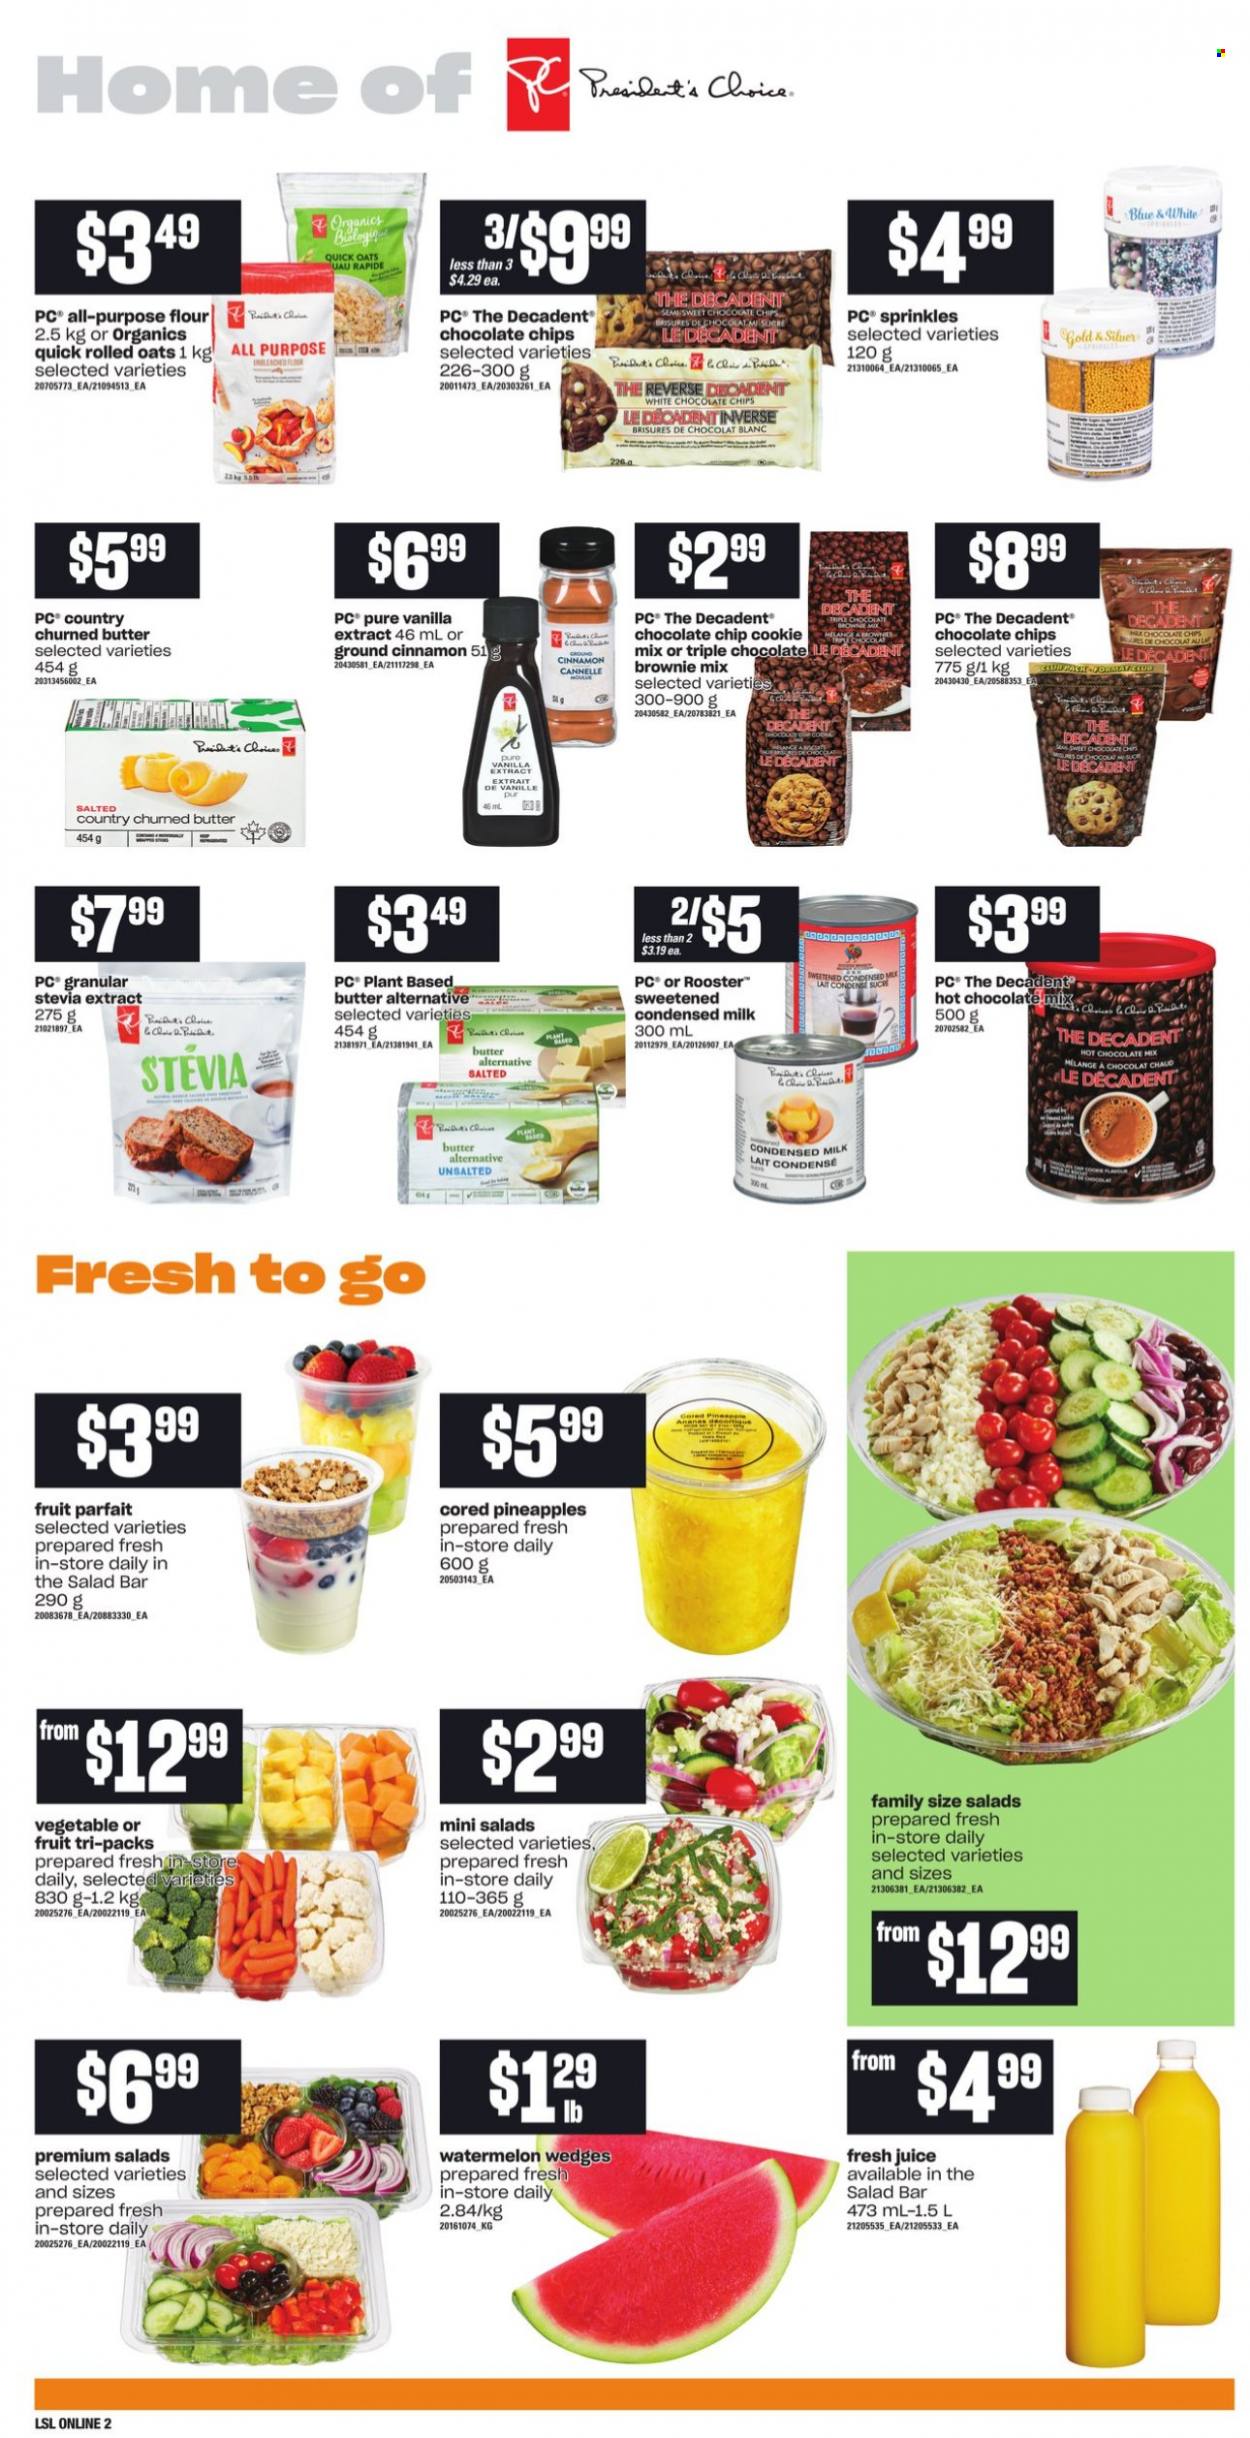 thumbnail - Loblaws Flyer - October 21, 2021 - October 27, 2021 - Sales products - brownie mix, salad, watermelon, pineapple, milk, condensed milk, butter, salted butter, flour, oats, vanilla extract, stevia, rolled oats, Quick Oats, cinnamon, juice, hot chocolate. Page 6.